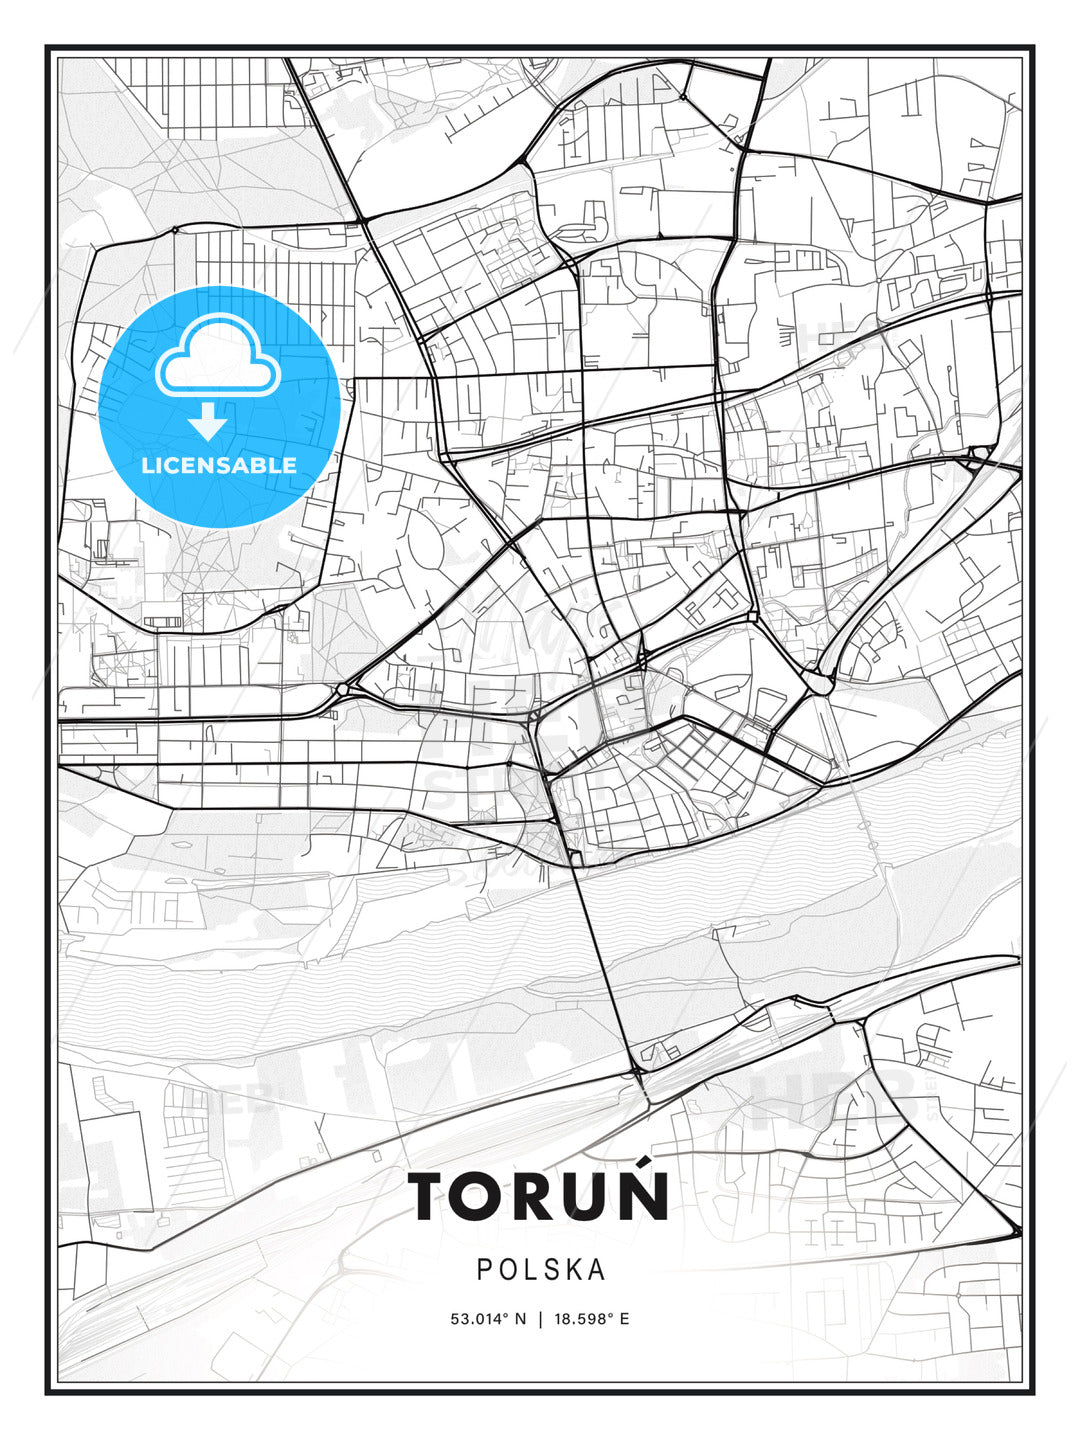 Toruń, Poland, Modern Print Template in Various Formats - HEBSTREITS Sketches